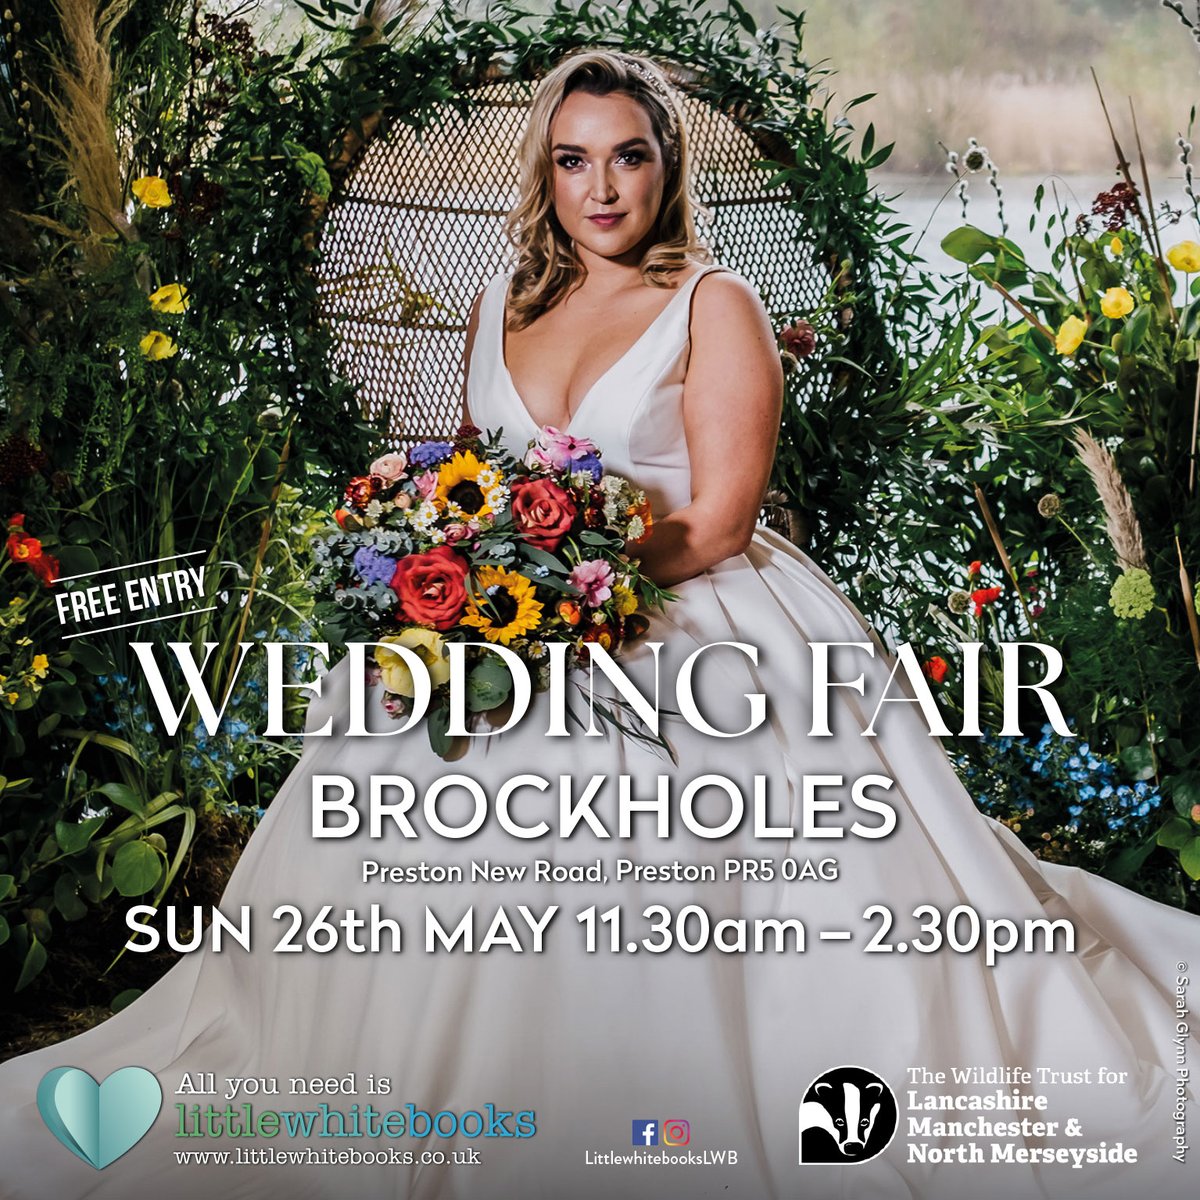 Looking for a unique wedding venue to decorate exactly as you want? @LWBLittleWhite are at Brockholes on Sun 26 May 💚 30 fabulous suppliers will help make your day special 💍 Free entry and parking from 11:30am. Register your interest: bit.ly/43KxrvT